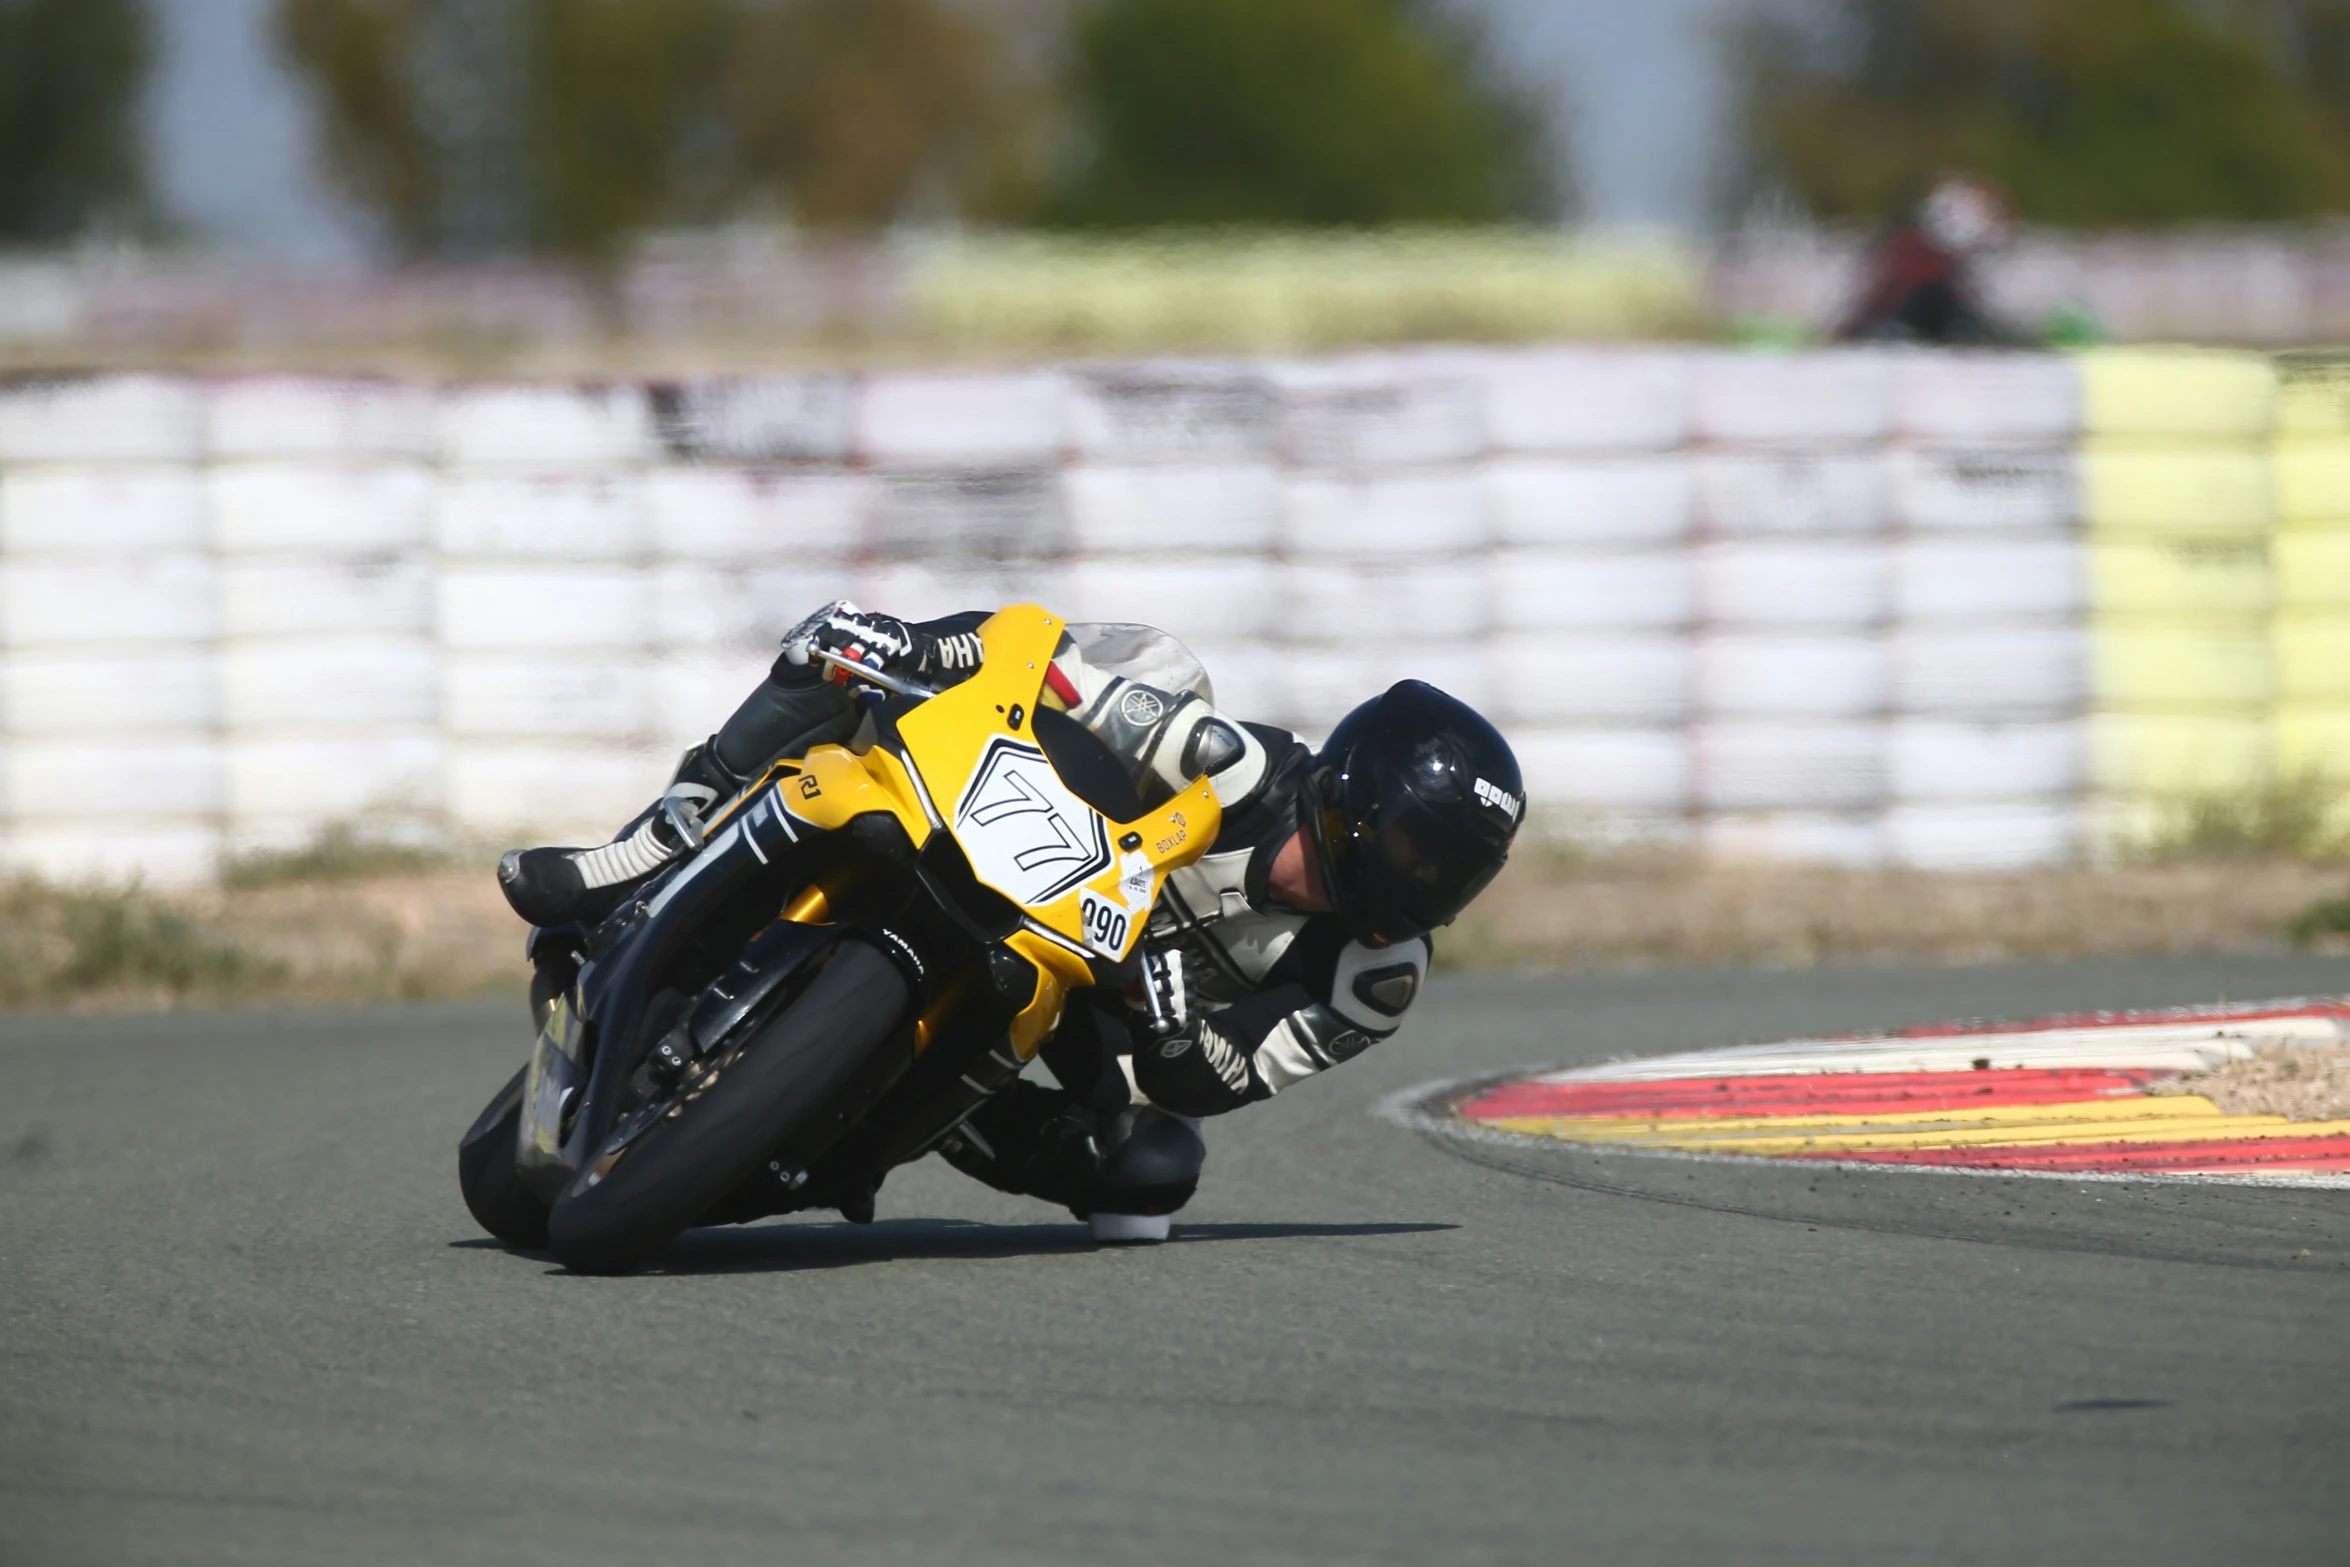 motorcycle racer on race track taking a sharp turn